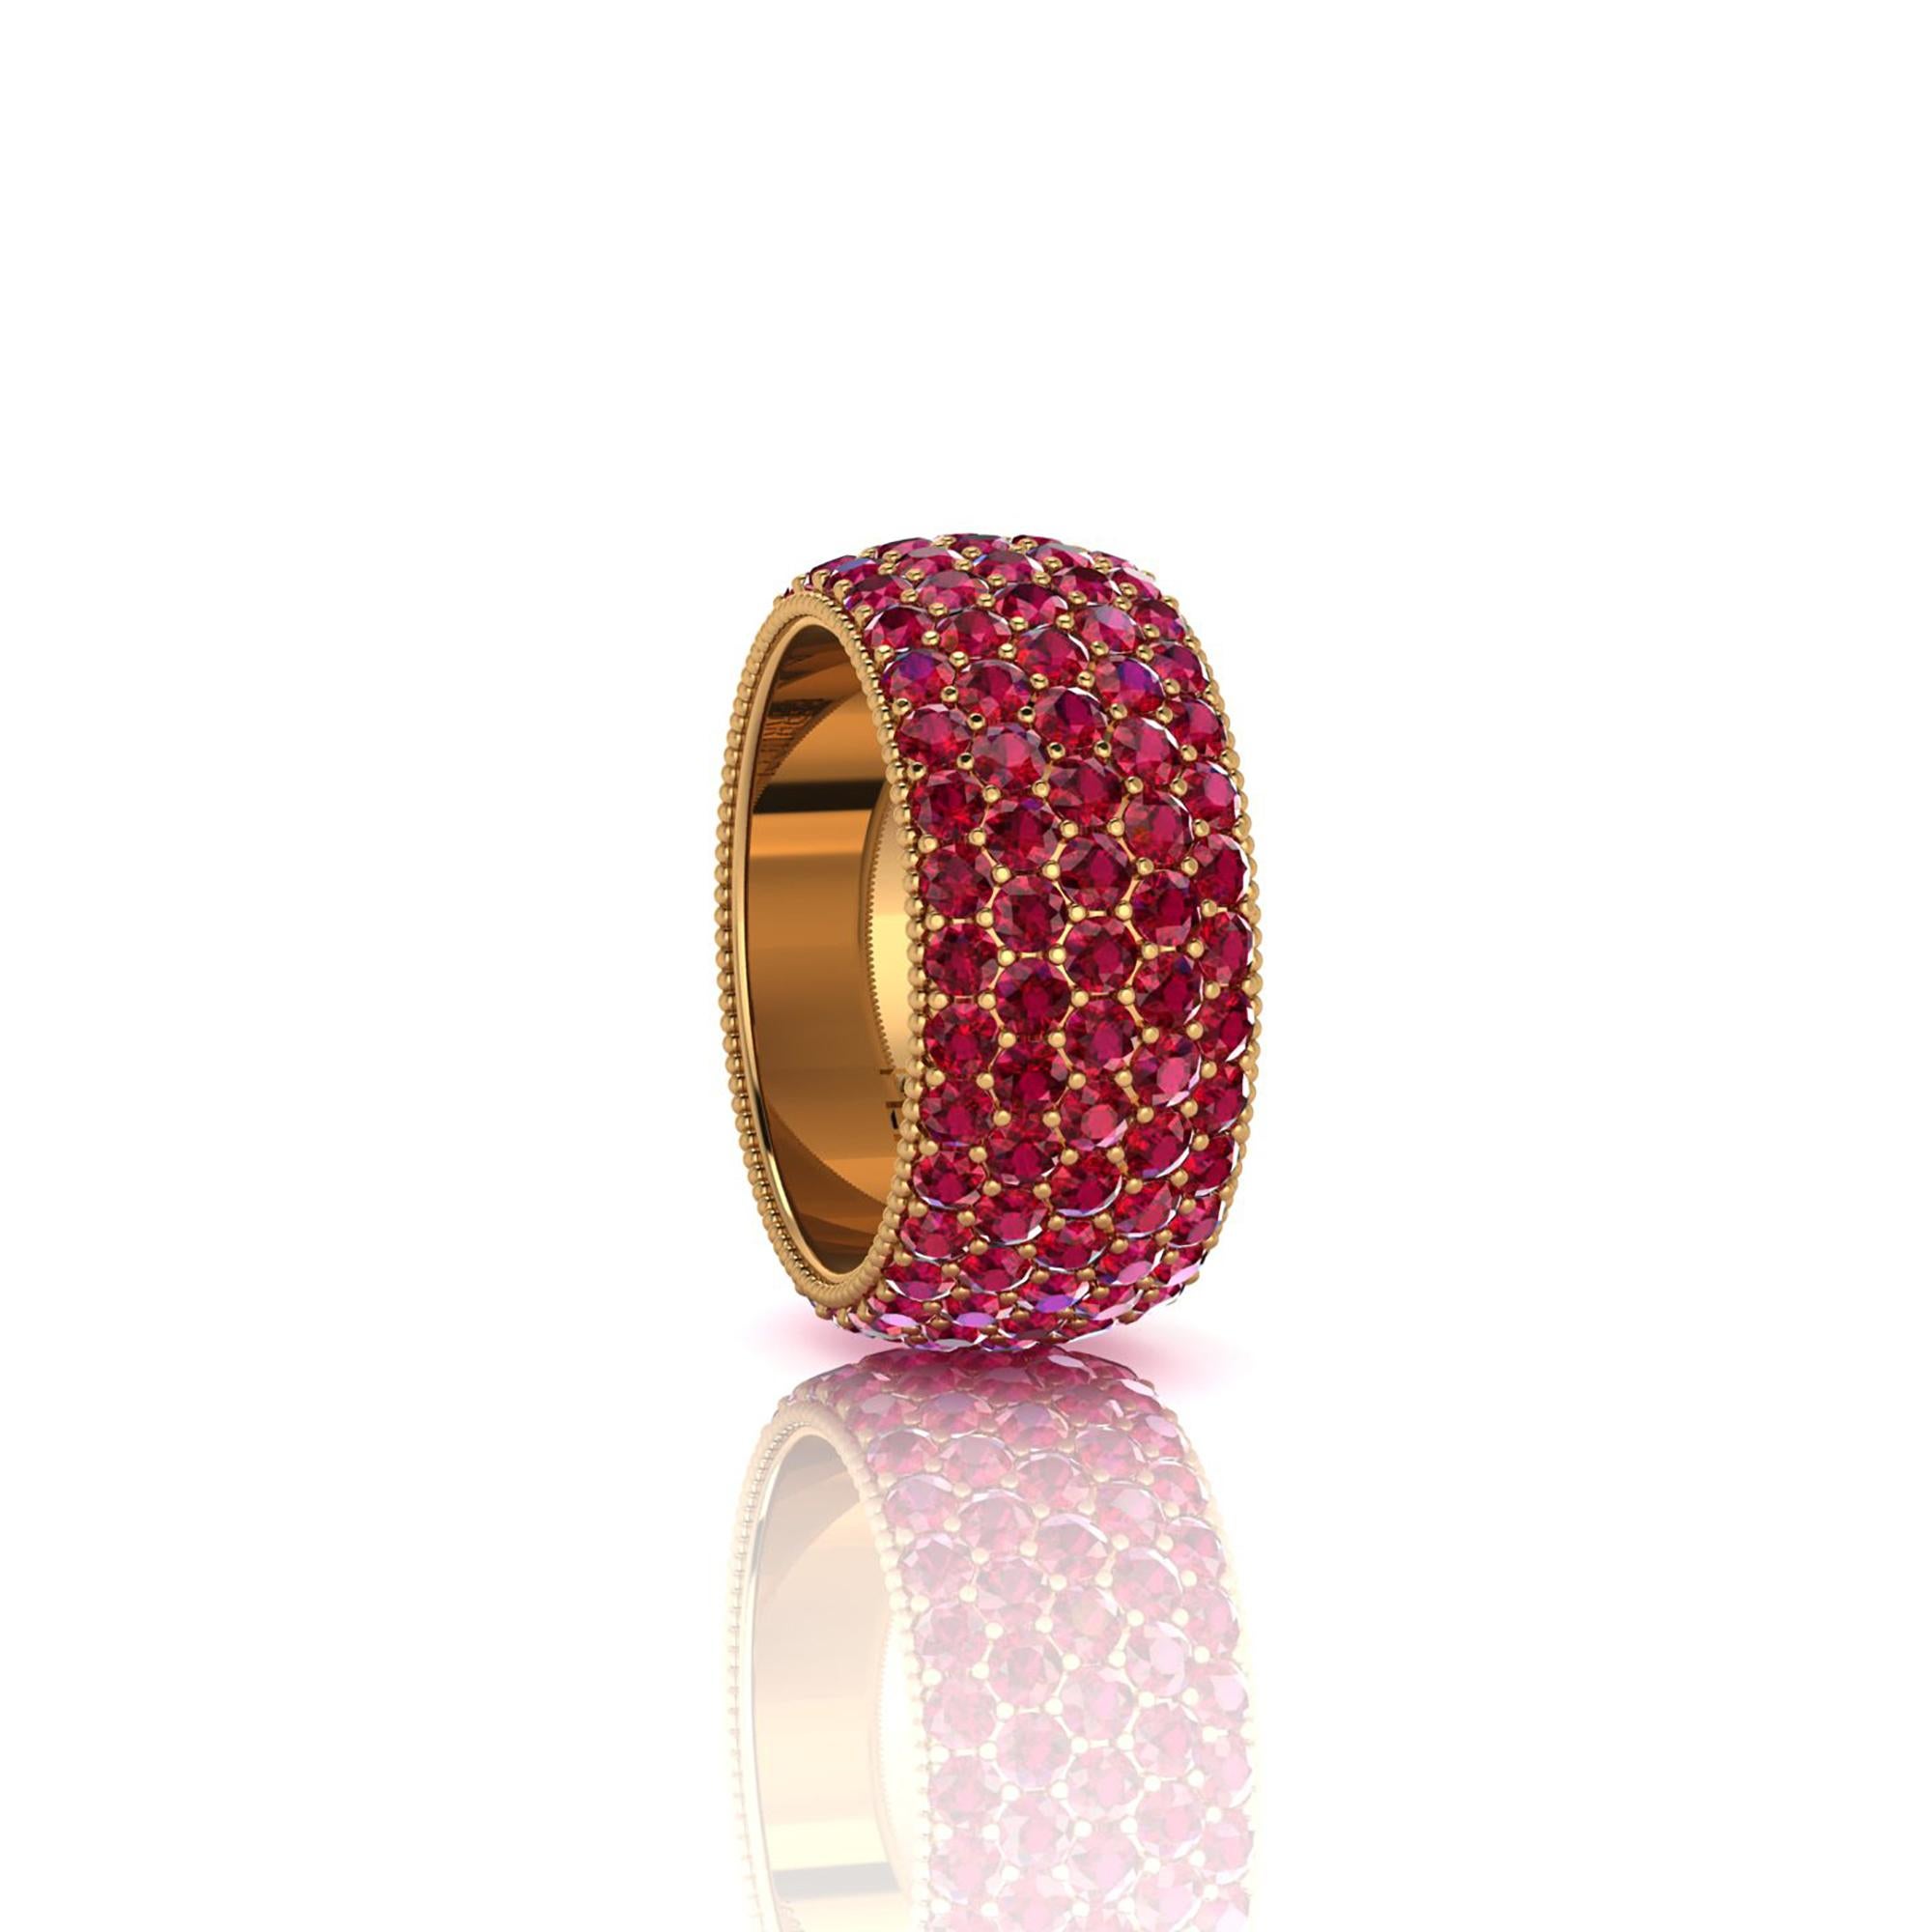 Wide red Ruby pave' ring, with a slightly dome feeling, a wrap of deep, bright red, for an approximate total carat weight of 4.60 carats, hand made in New York City with the best Italian craftsmanship, conceived in 18k yellow gold.
Classic,